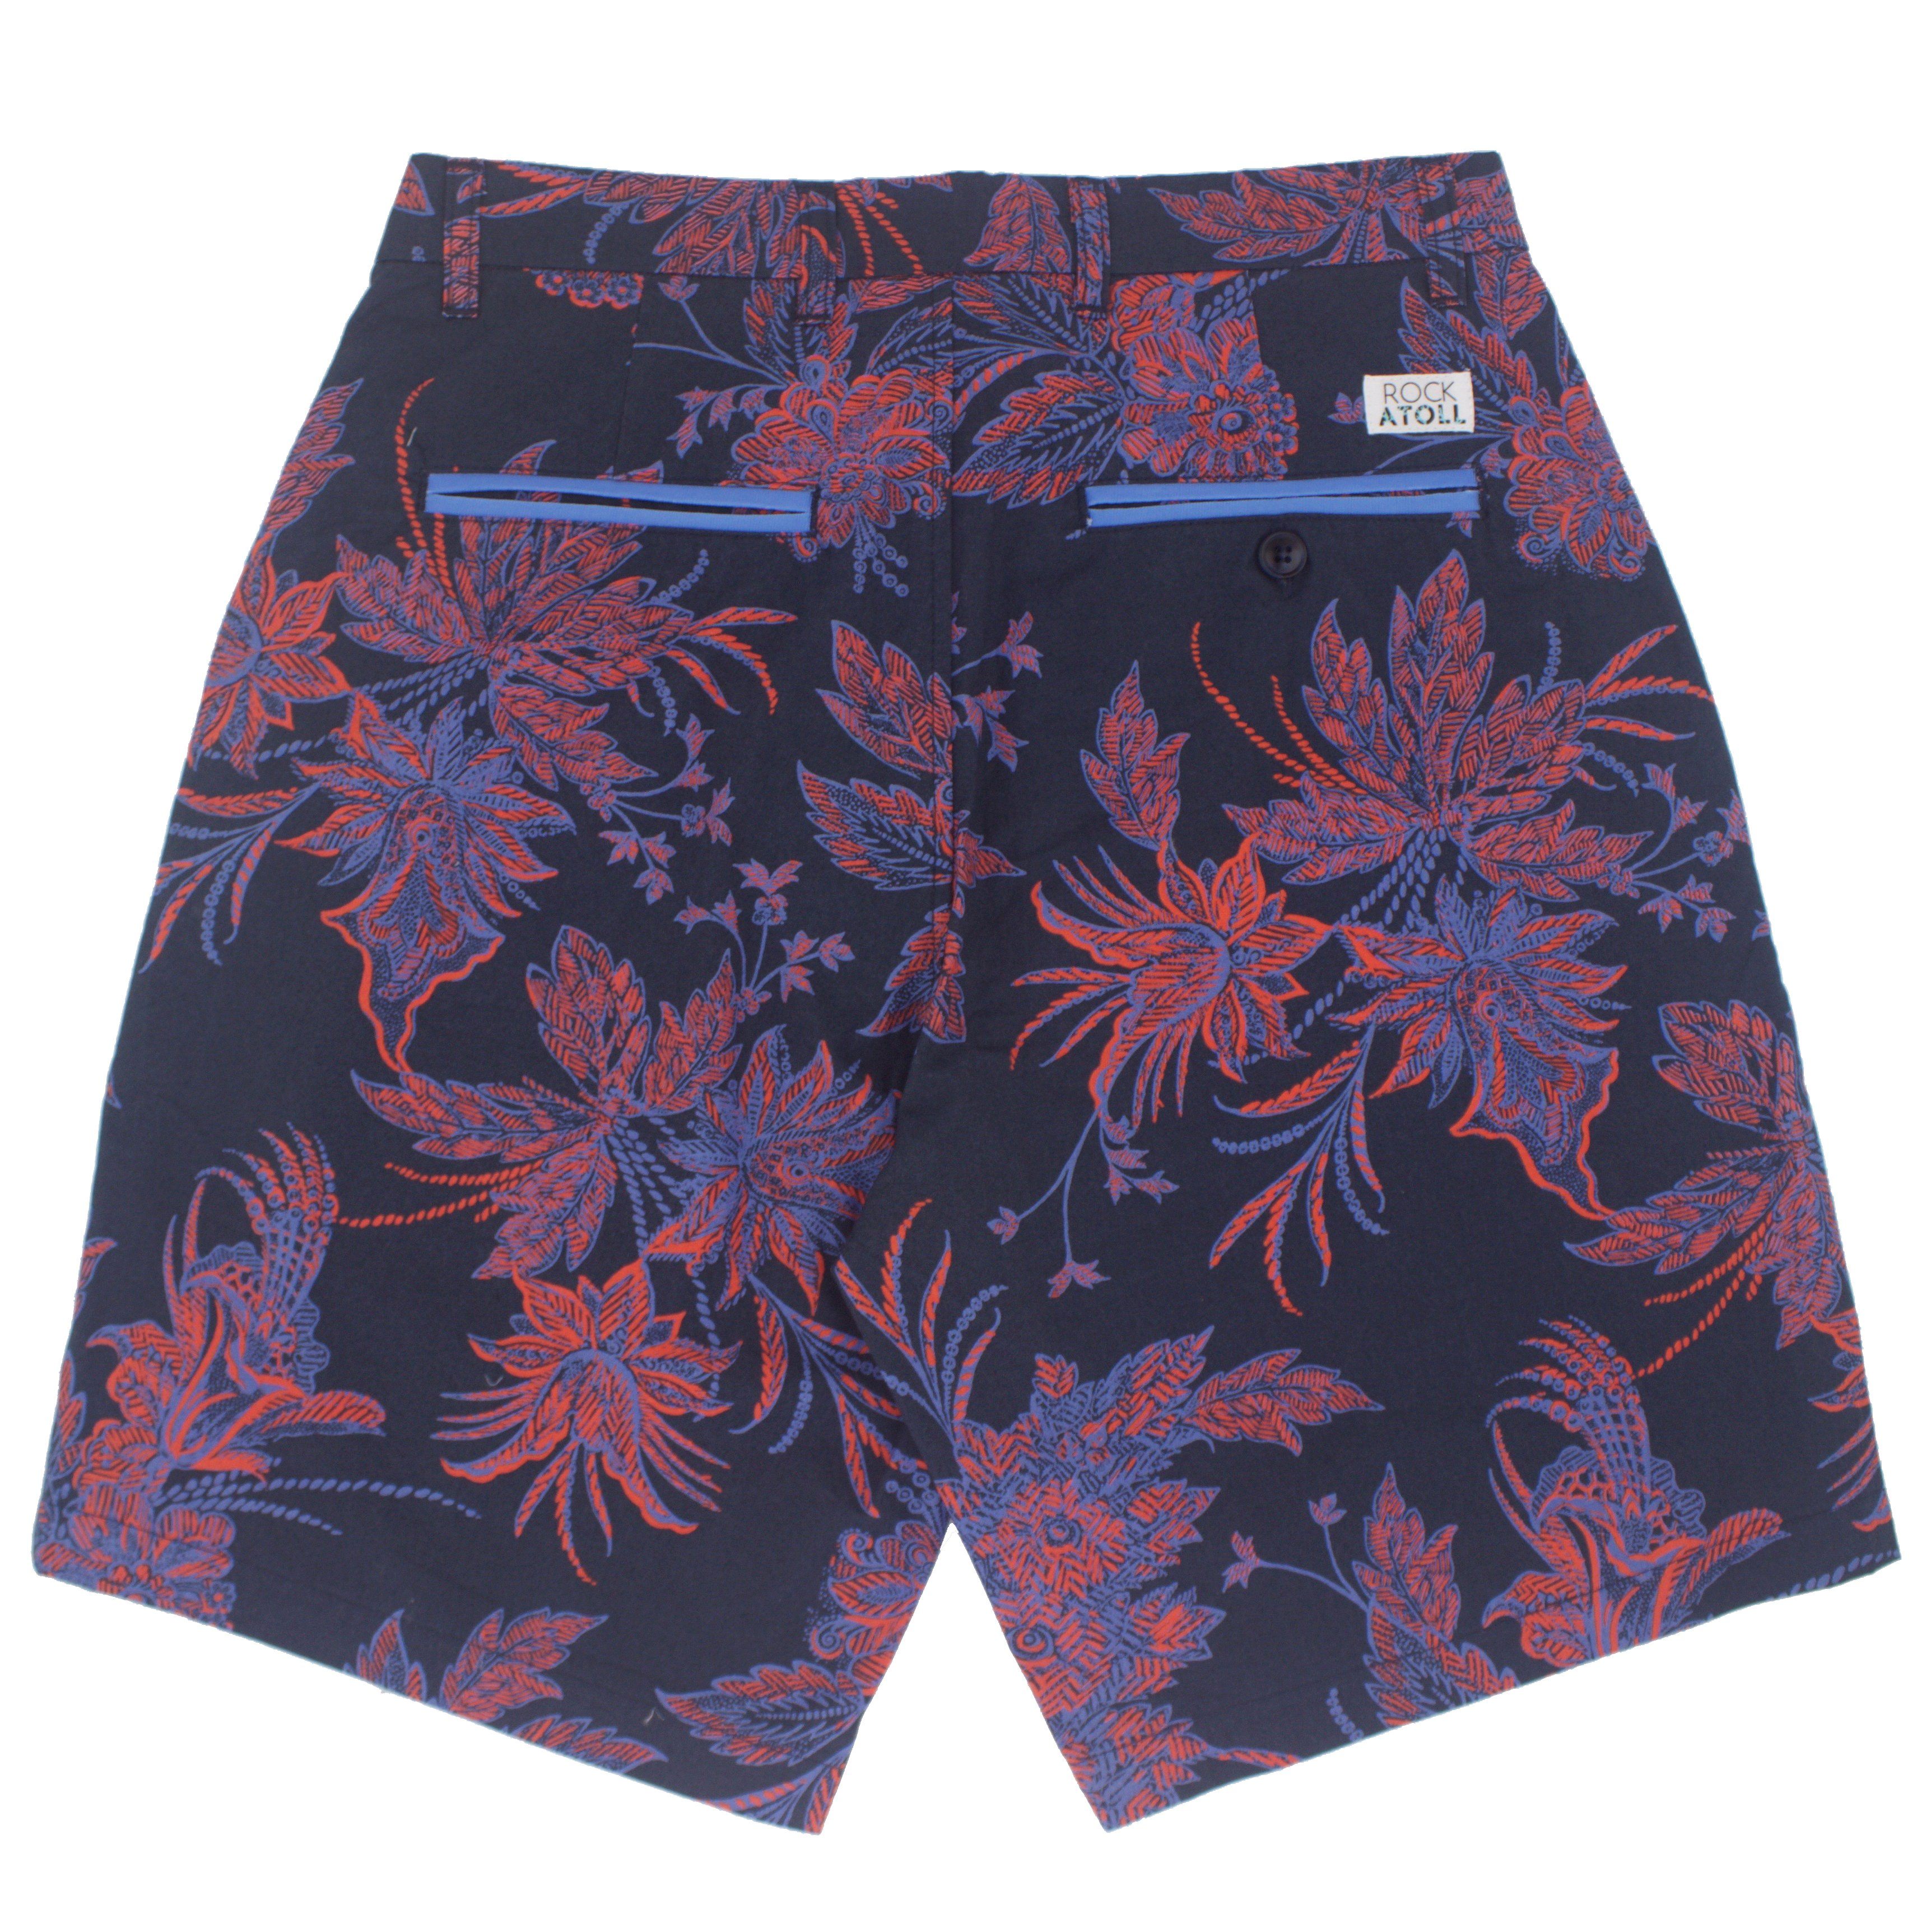 Bold Colorful Golf Shorts for Men in Navy Blue with Flower Print